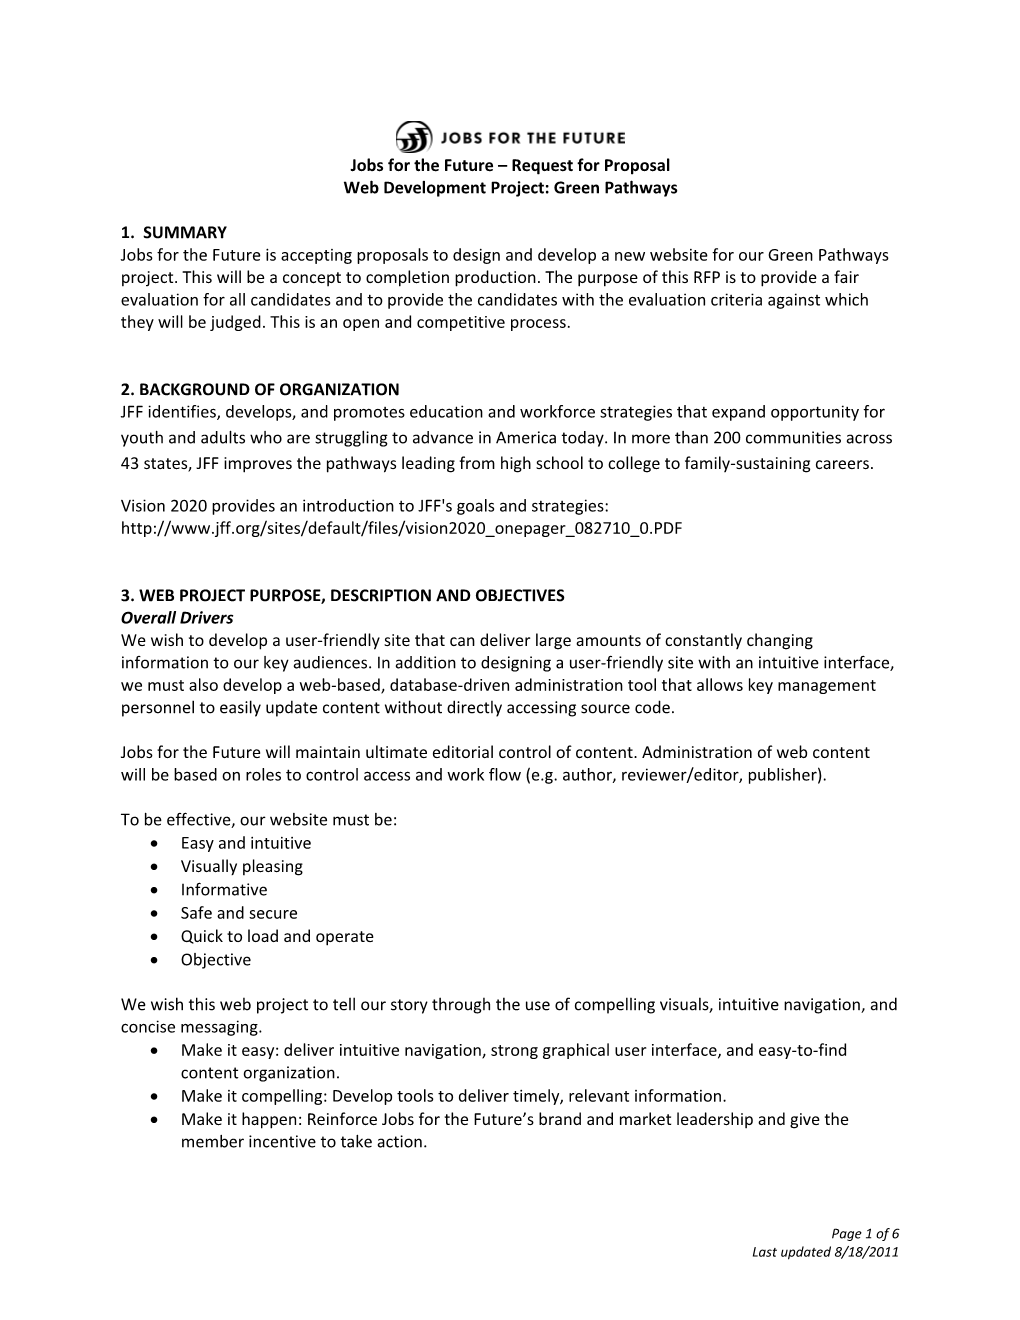 Jobs for the Future Request for Proposal